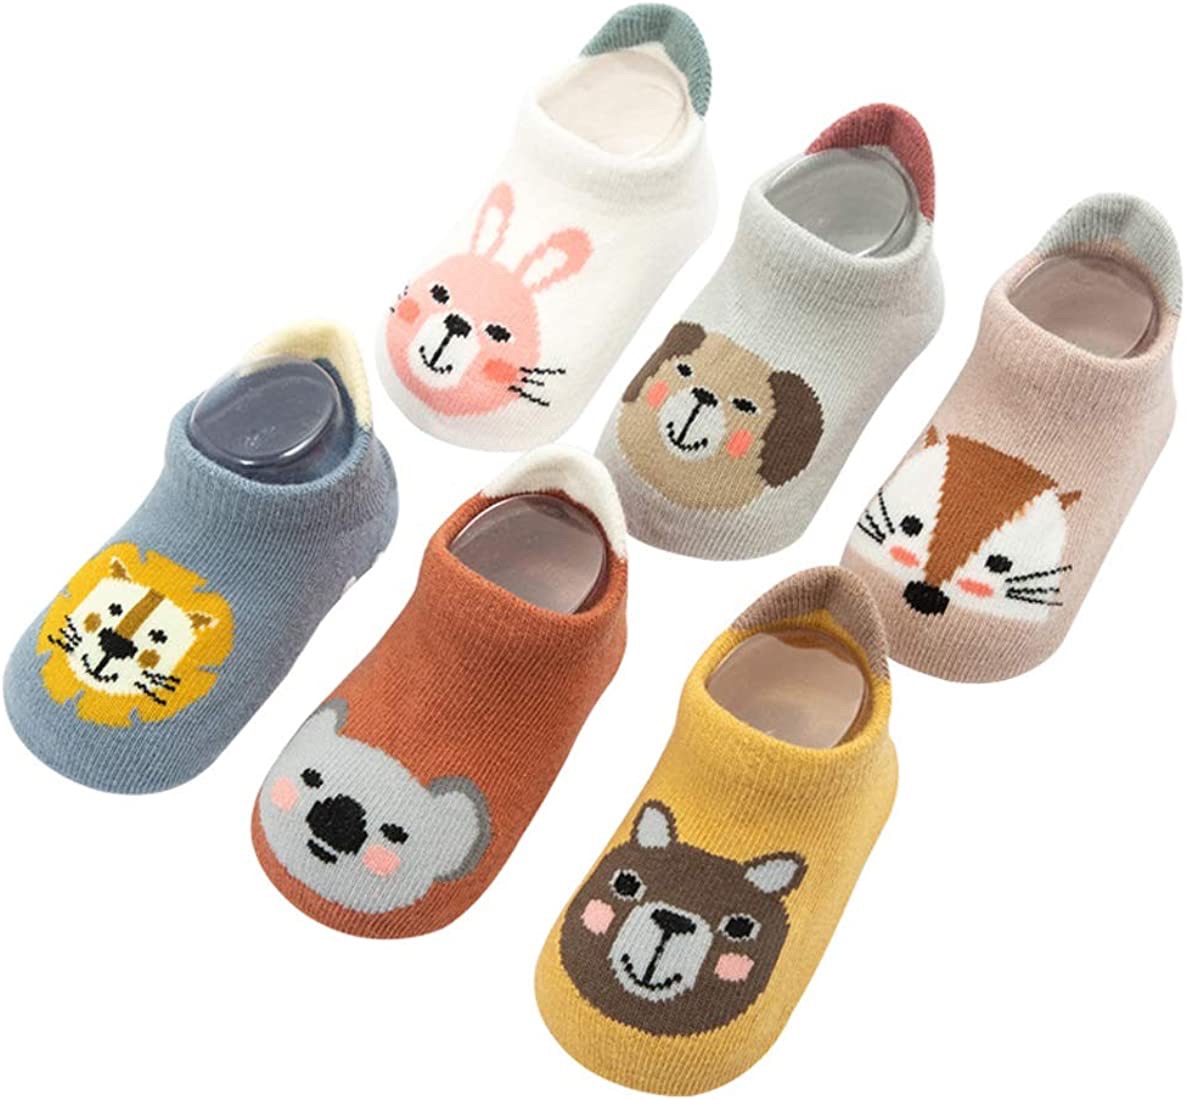 Amazon.com: Kisgyst 6 Pairs Baby Non Slip Grip Cotton Animal Ankle Socks with Non Skid Soles for Newborn Toddler Boy Girl, 18 Months : Clothing, Shoes & Jewelry